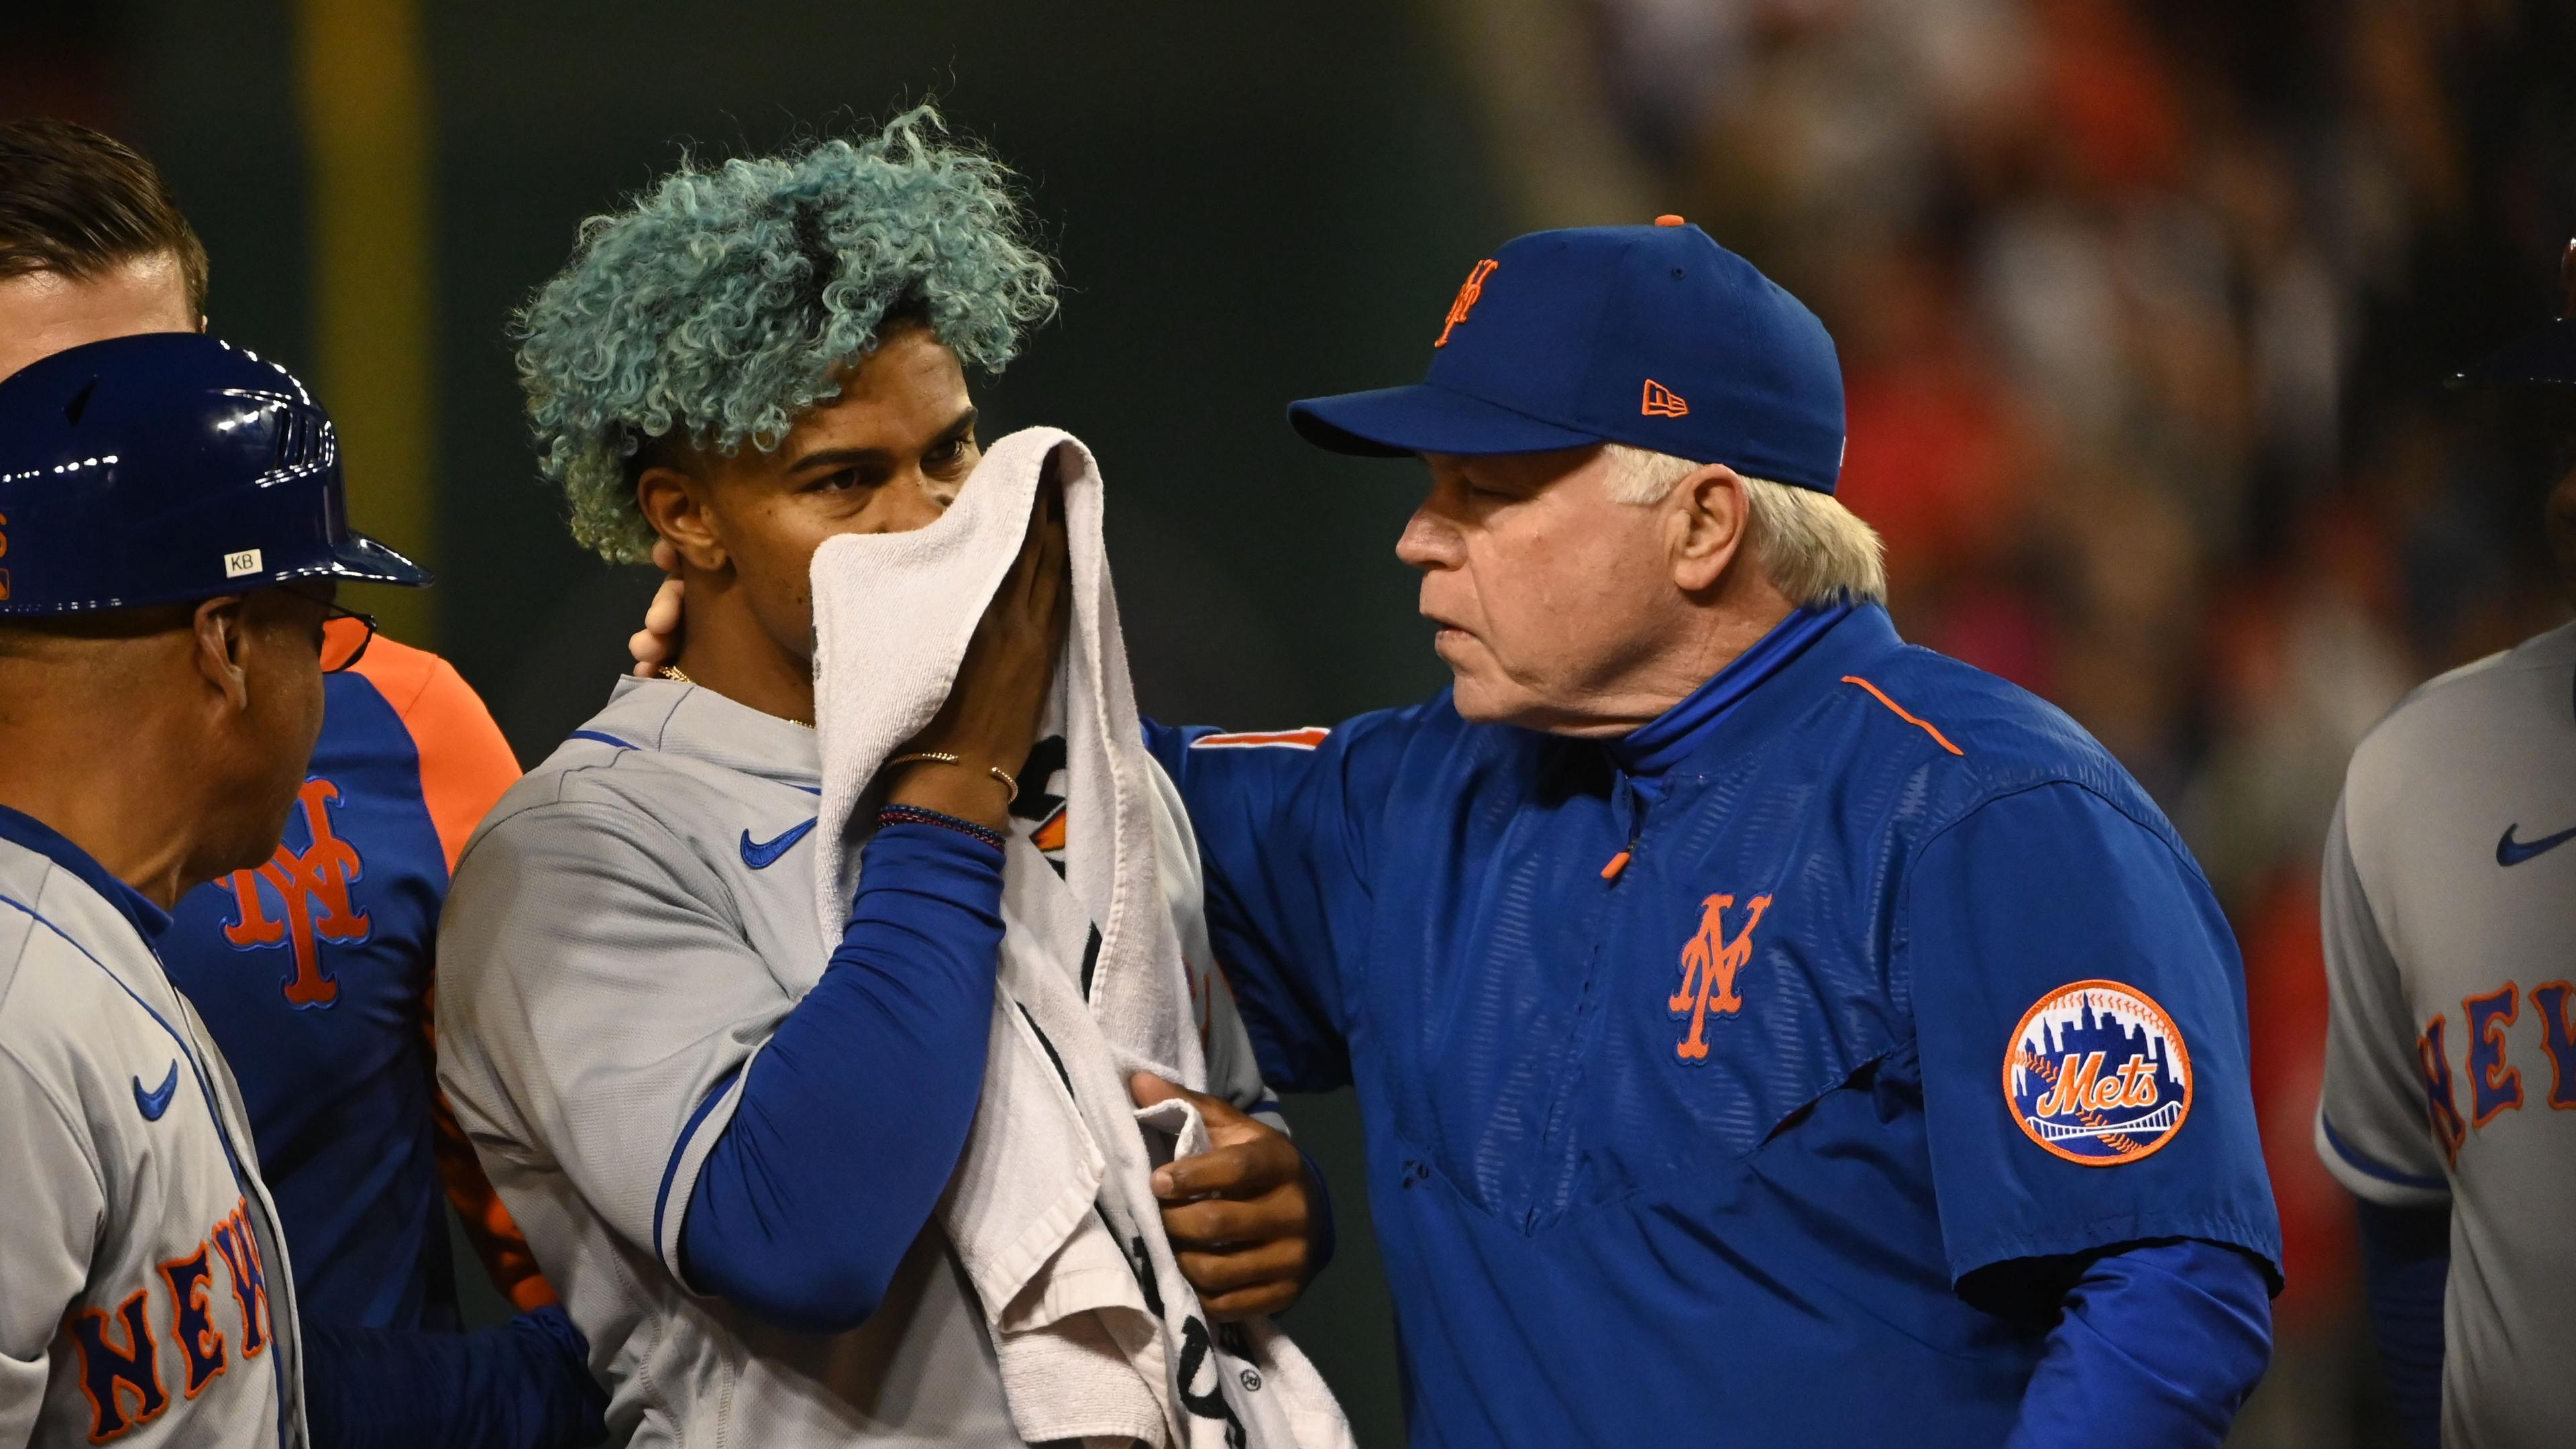 Apr 8, 2022; Washington, District of Columbia, USA; New York Mets shortstop Francisco Lindor (12) covers his face after being hit by pitch while manager Buck Showalter (11) walks with him during the fifth inning against the Washington Nationals at Nationals Park. Mandatory Credit: Tommy Gilligan-USA TODAY Sports / © Tommy Gilligan-USA TODAY Sports